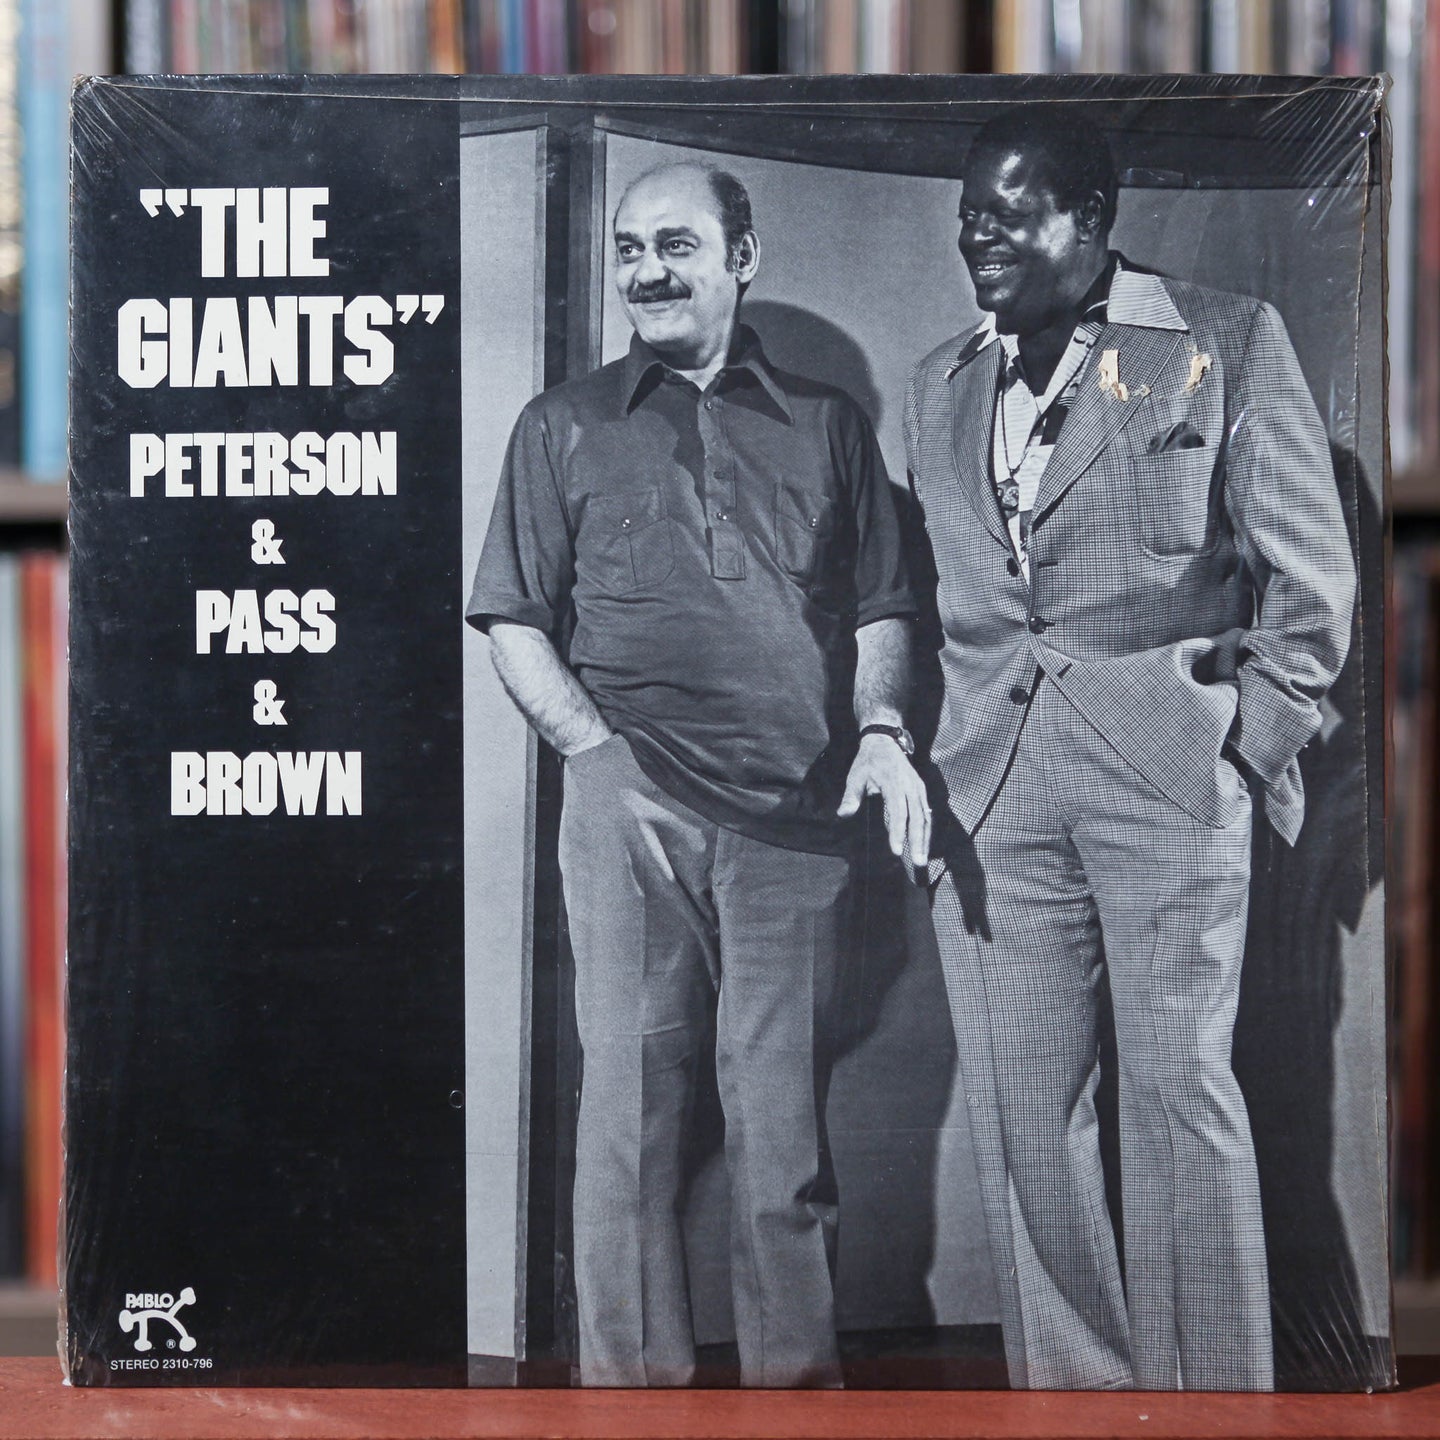 Peterson* & Pass* & Brown - The Giants - 1977 Pablo, EX/EX w/Shrink